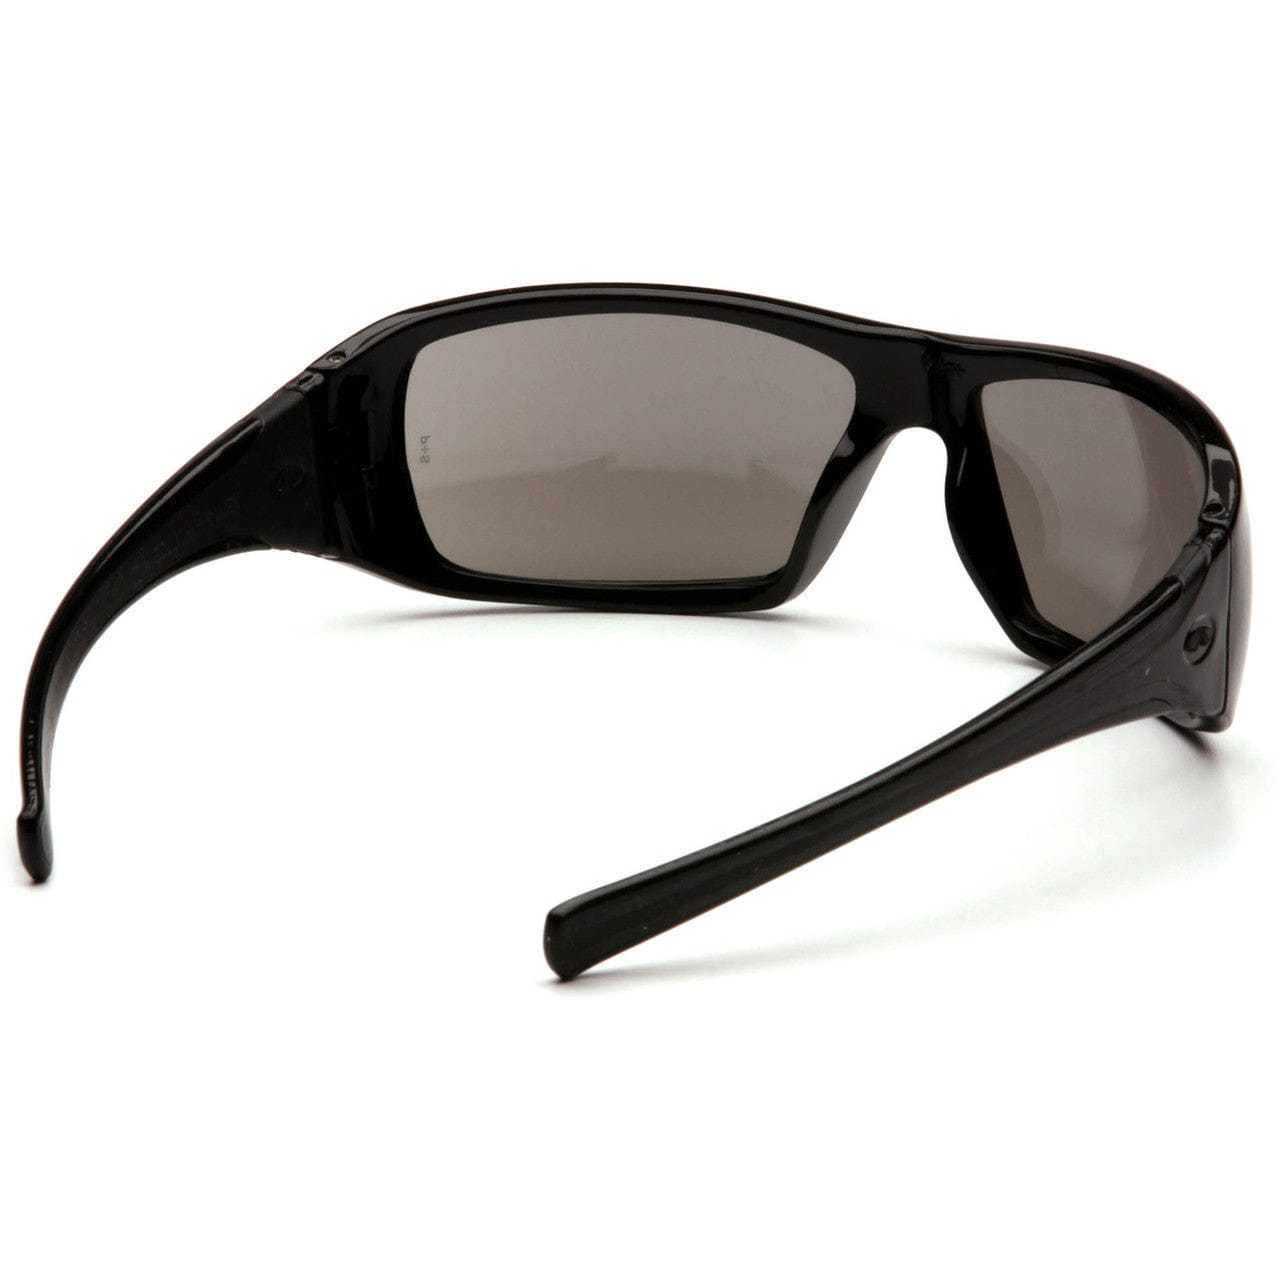 Pyramex Goliath Safety Glasses with Black Frame and Silver Mirror Lens SB5670D Inside View